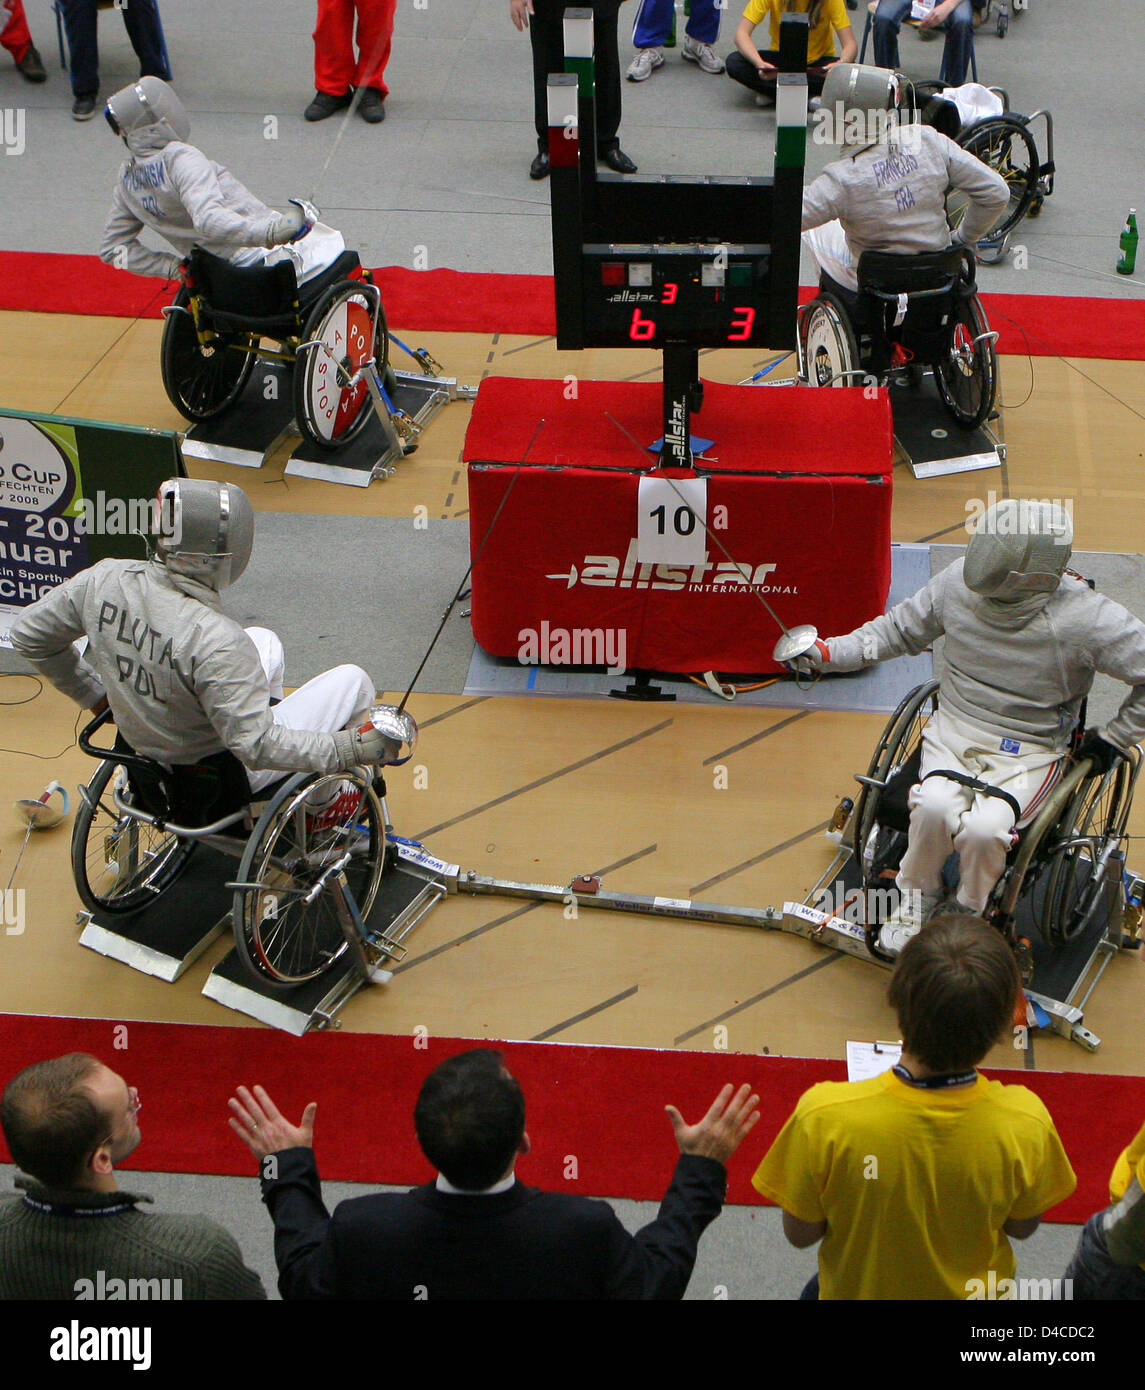 Wheel chair fencers shown in action during a preliminary round fight at the Wheel Chair World Cup in Malchow, Germany, 18 January 2008. Until Sunday 20 January 2008 113 athletes from 21 countries compete at  the World Cup event, which resembles a final chance to qualify for the Paralympics in Beijing. Photo: BERND WUESTNECK Stock Photo